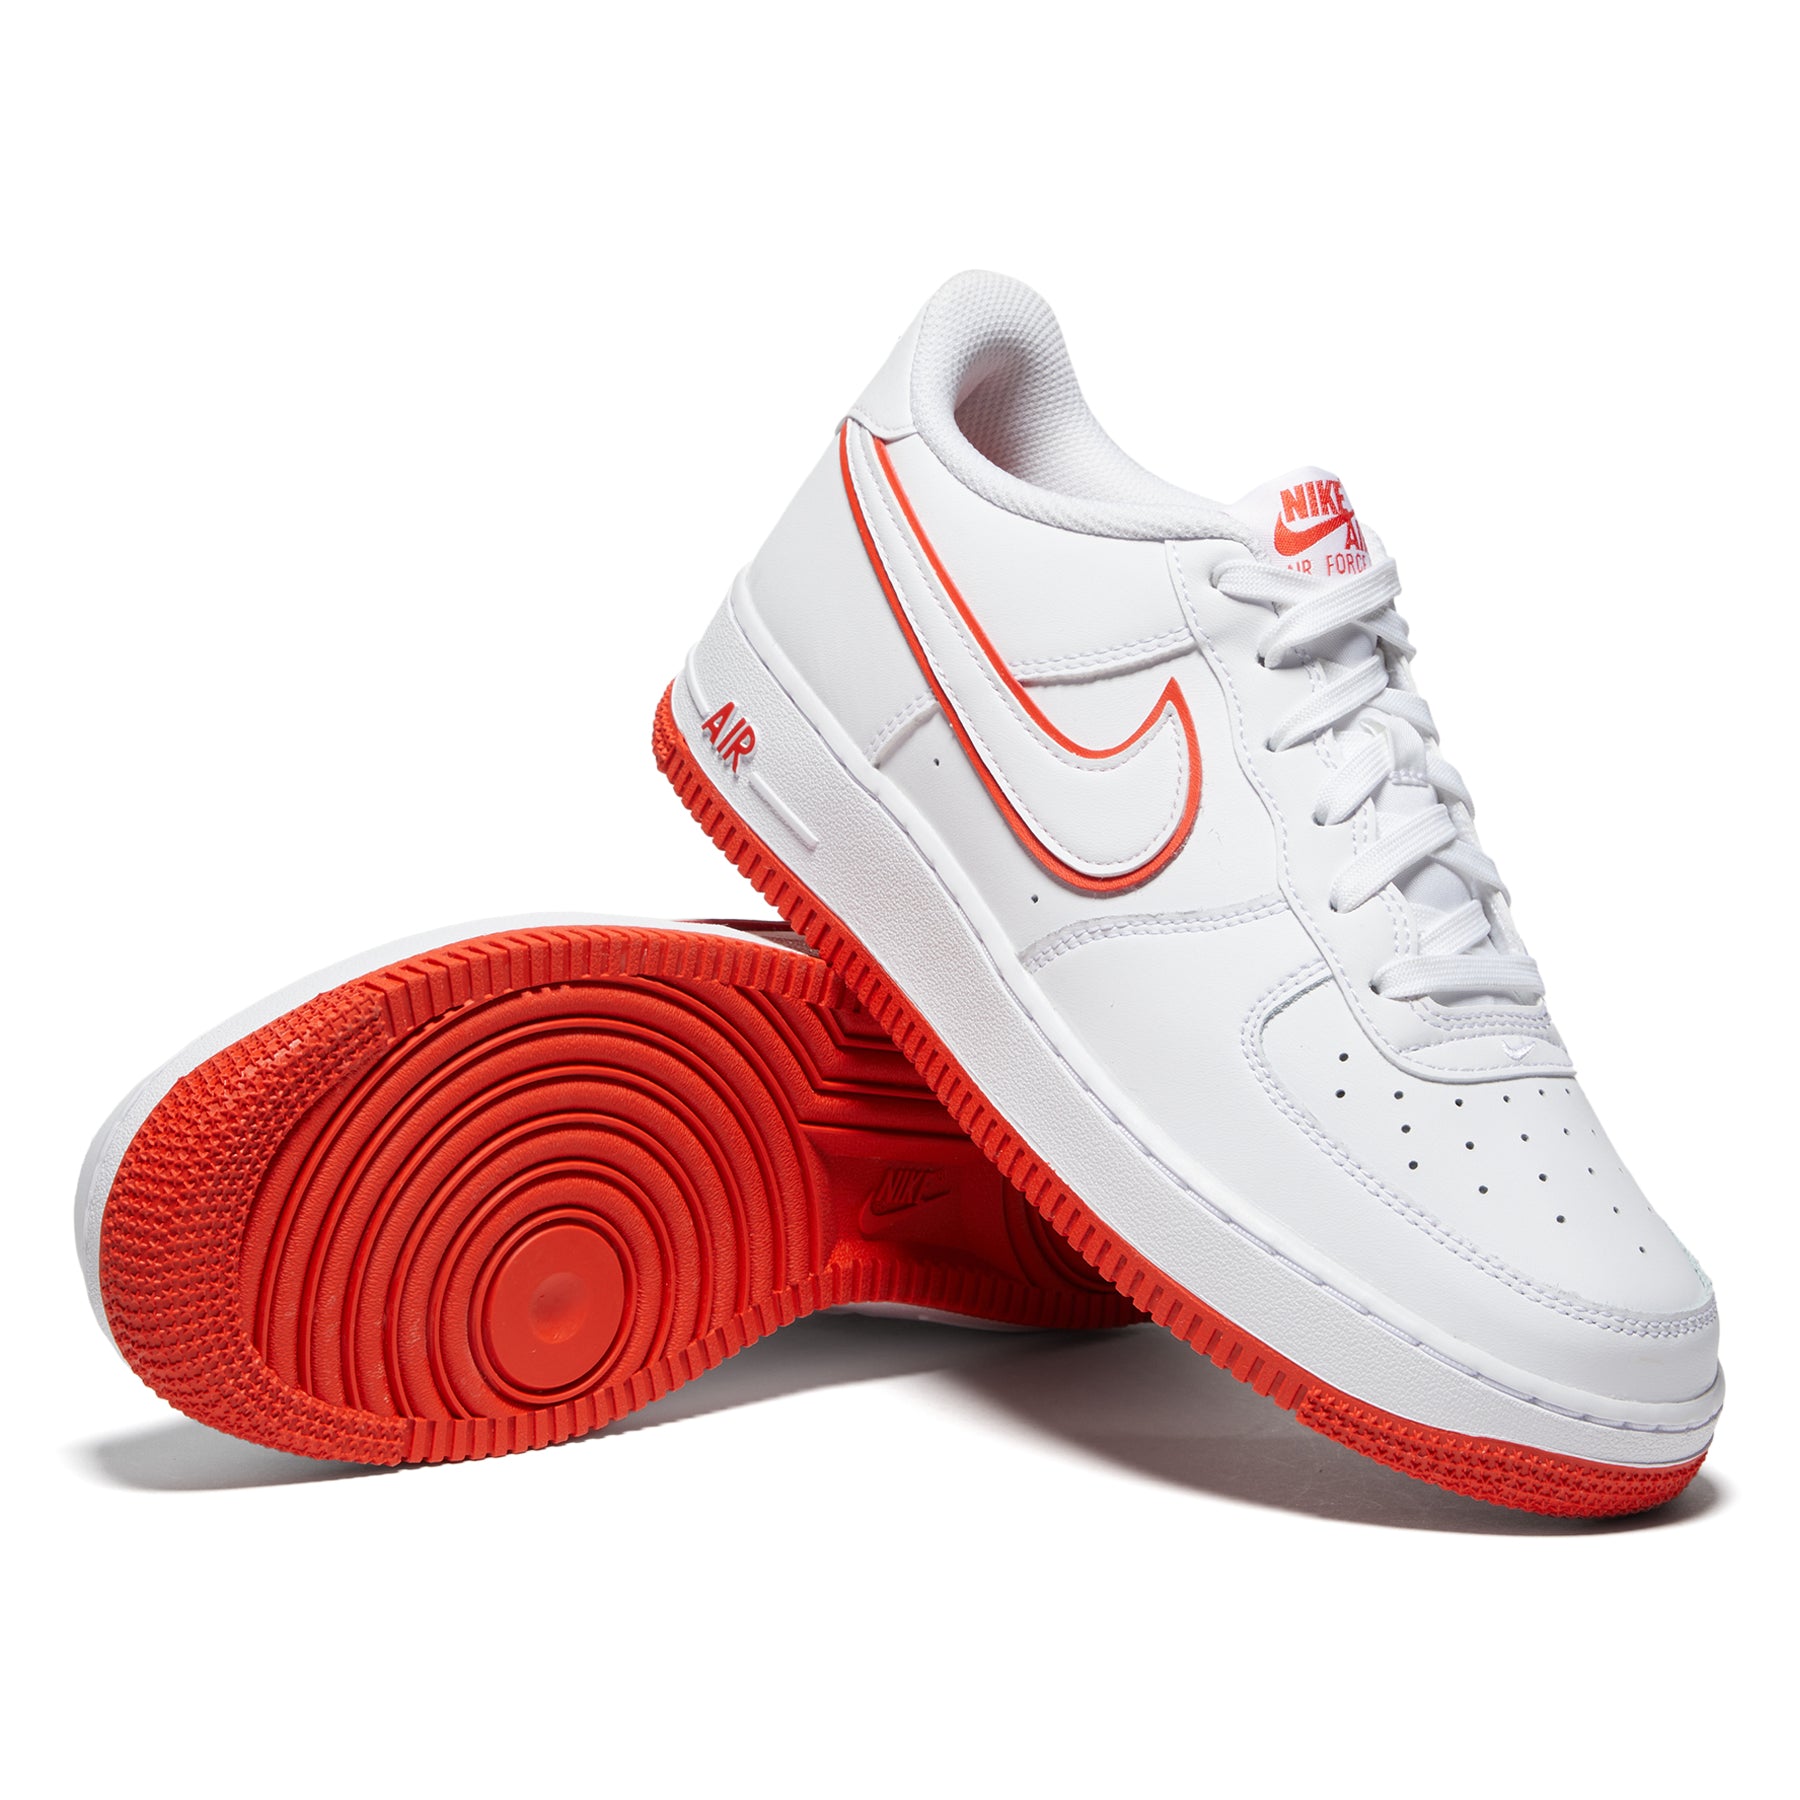 Nike Outlines The Air Force 1 Low In Picante Red - Sneaker News